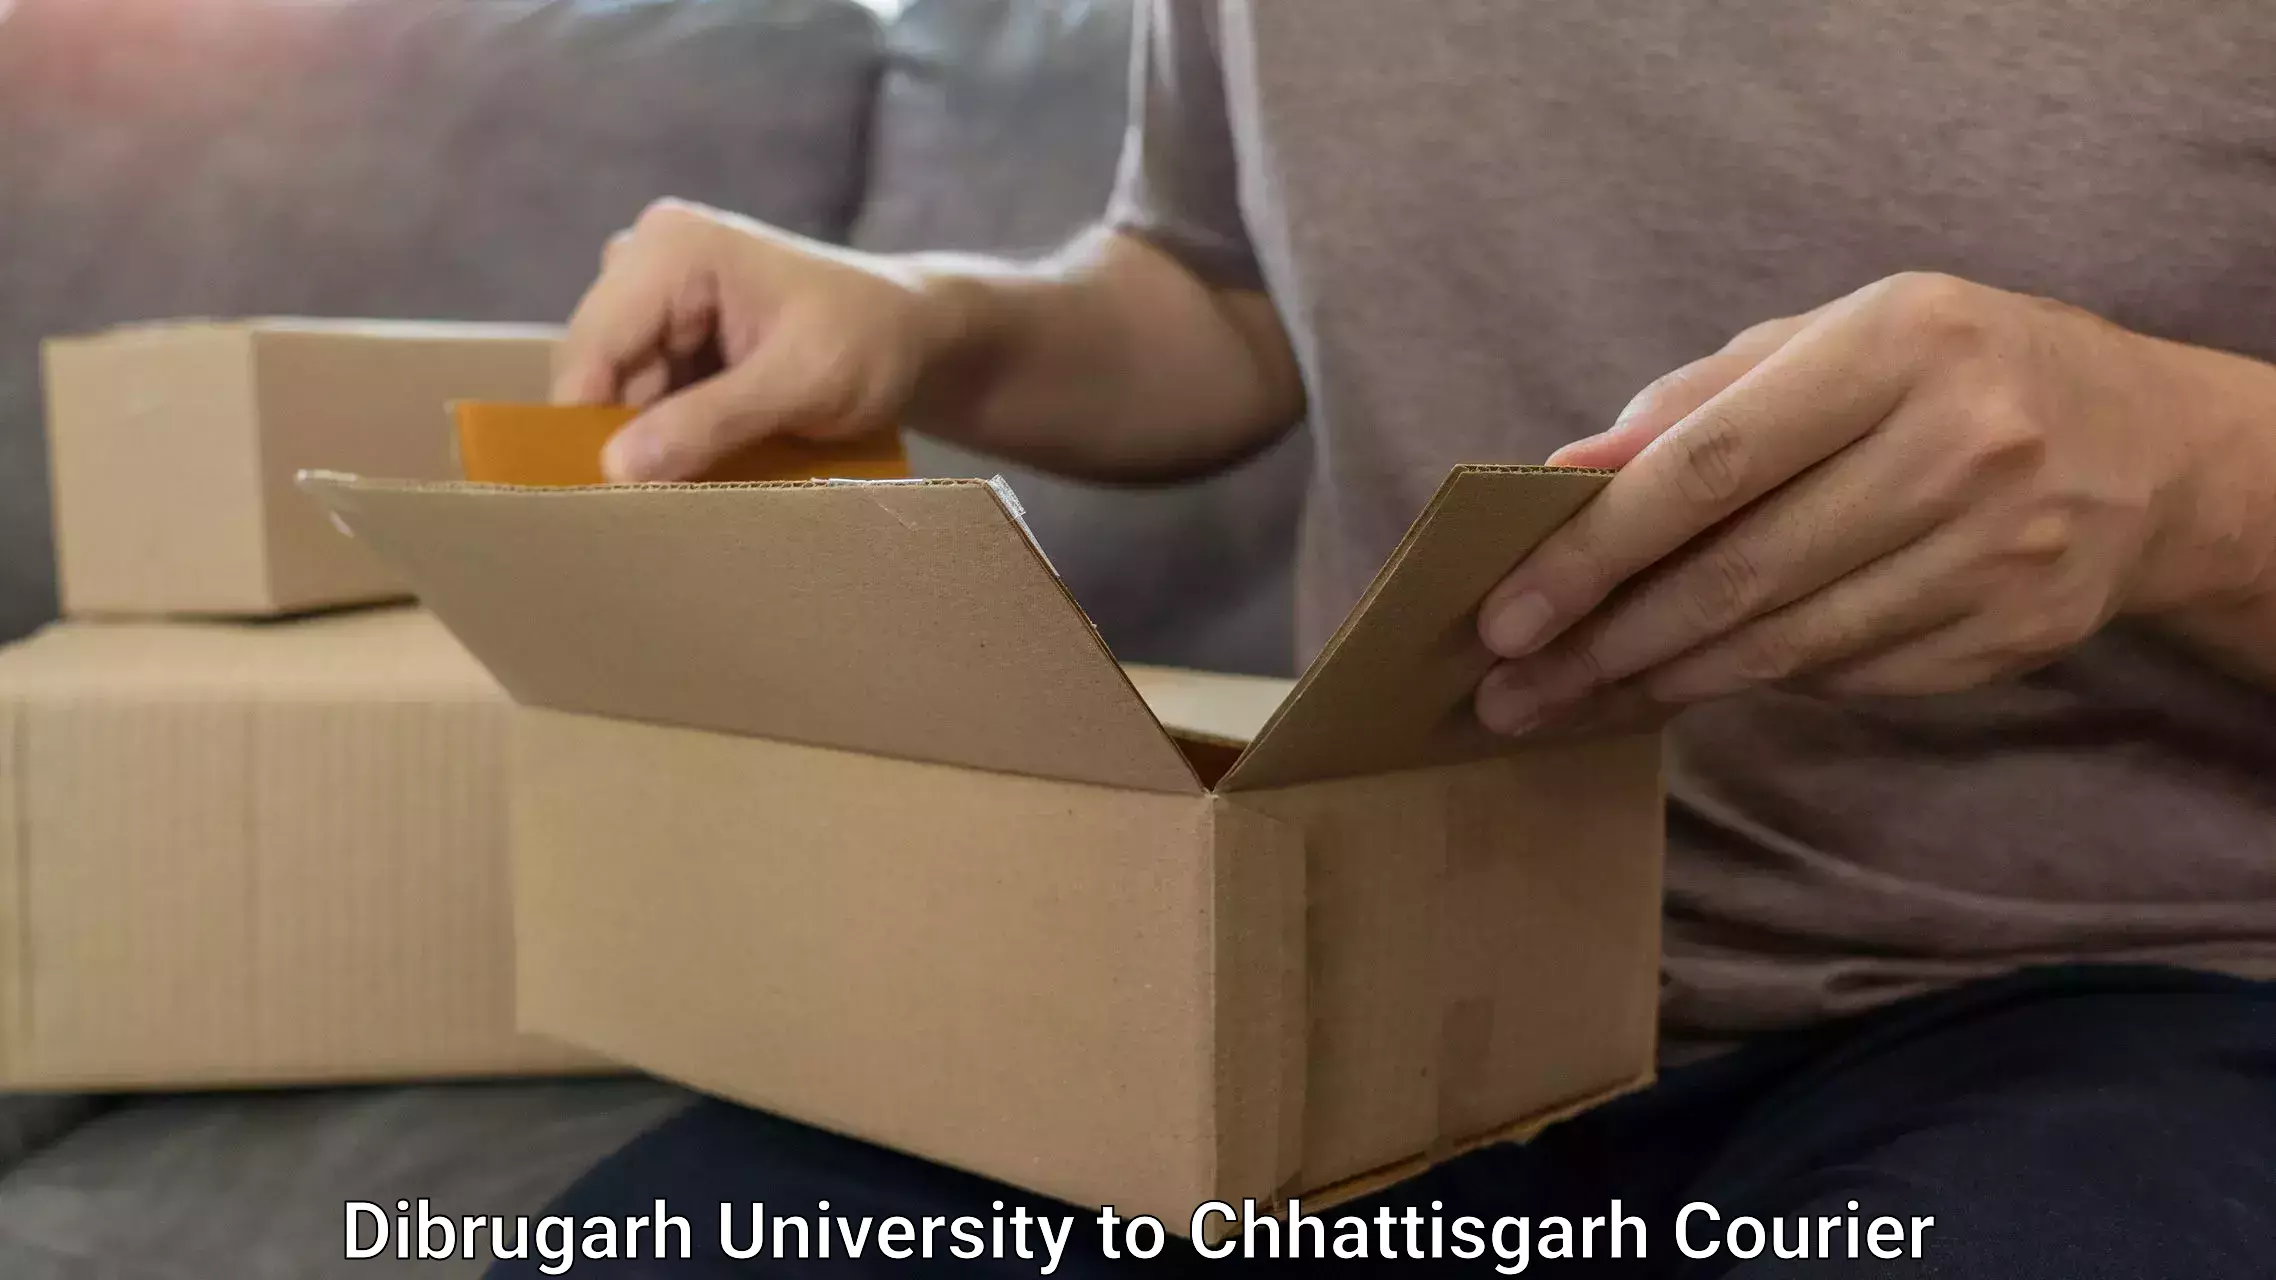 Luggage delivery system Dibrugarh University to IIT Bhilai